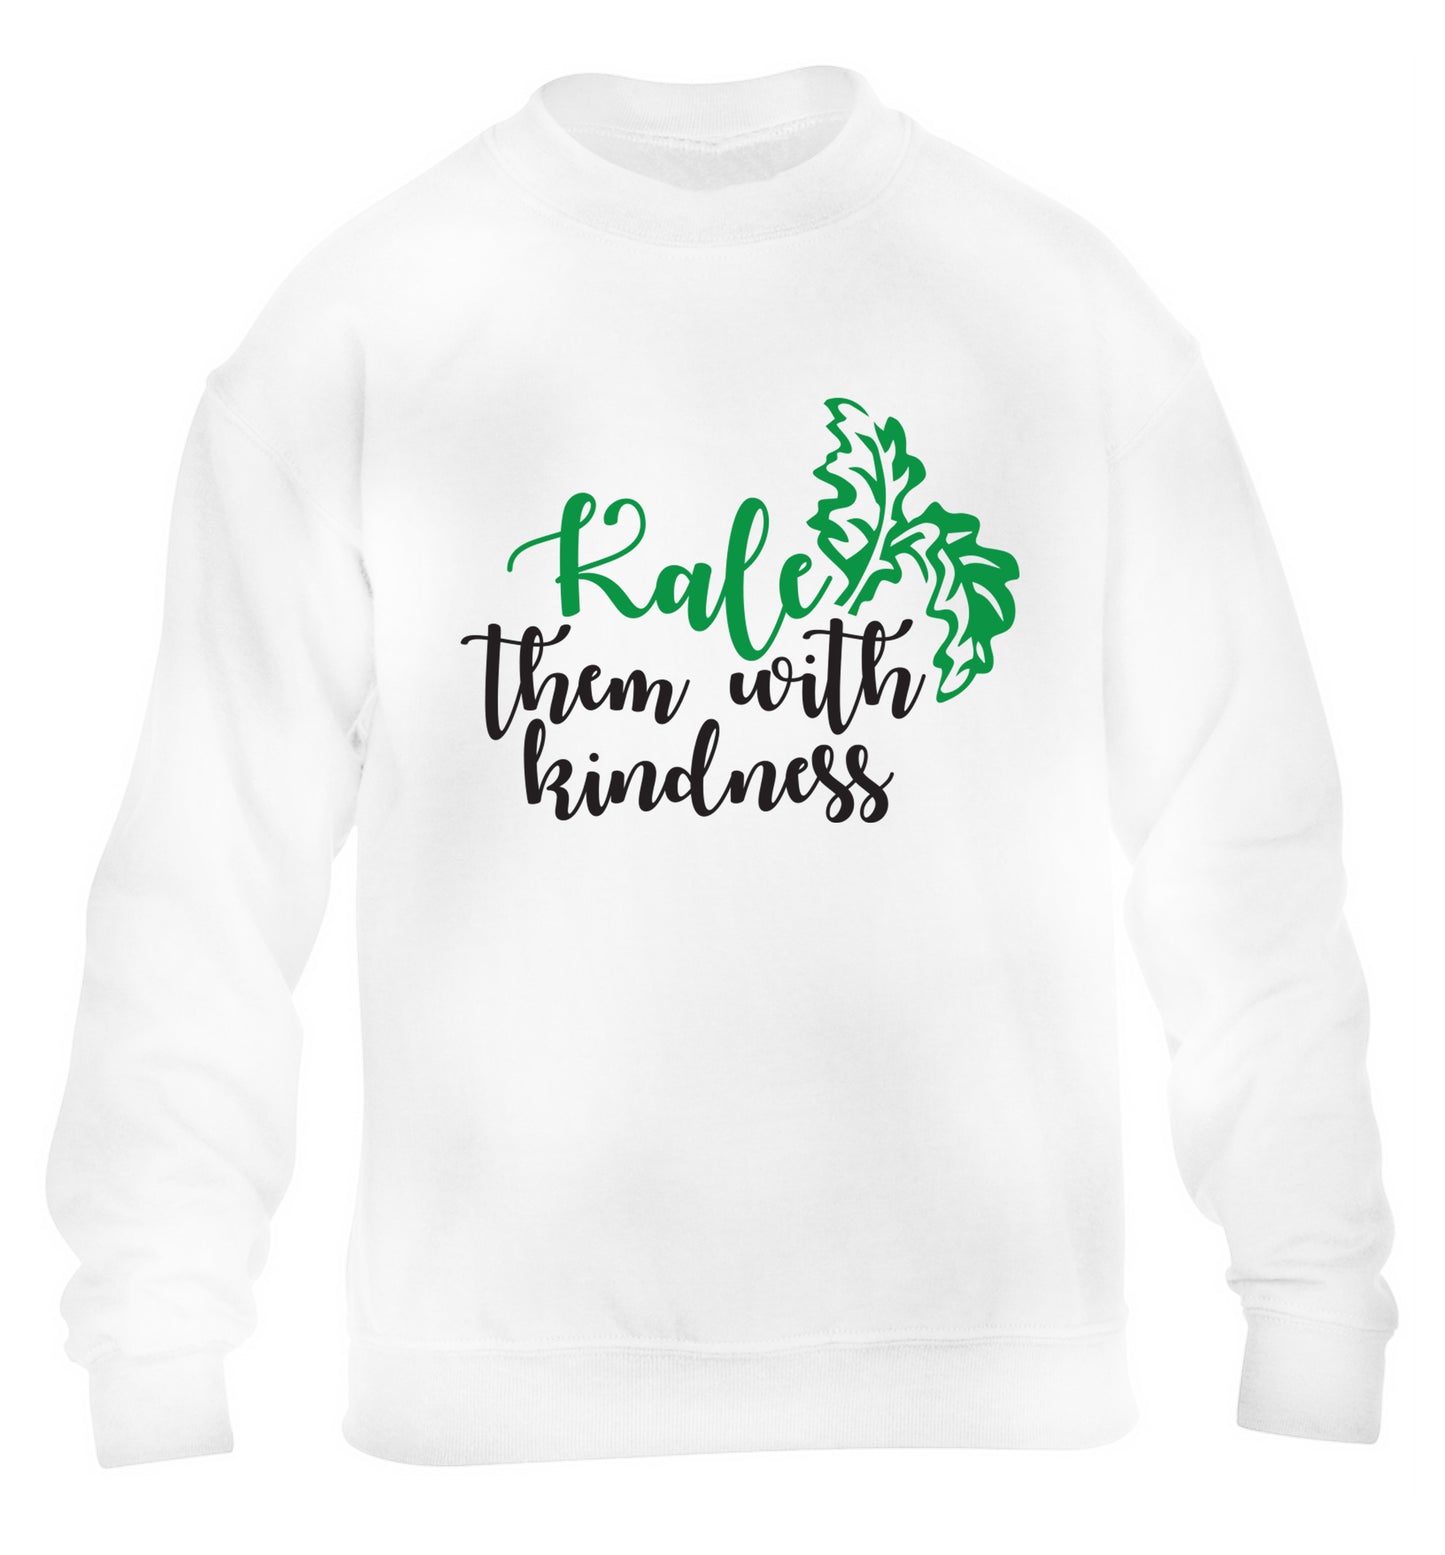 Kale them with kindness children's white sweater 12-14 Years